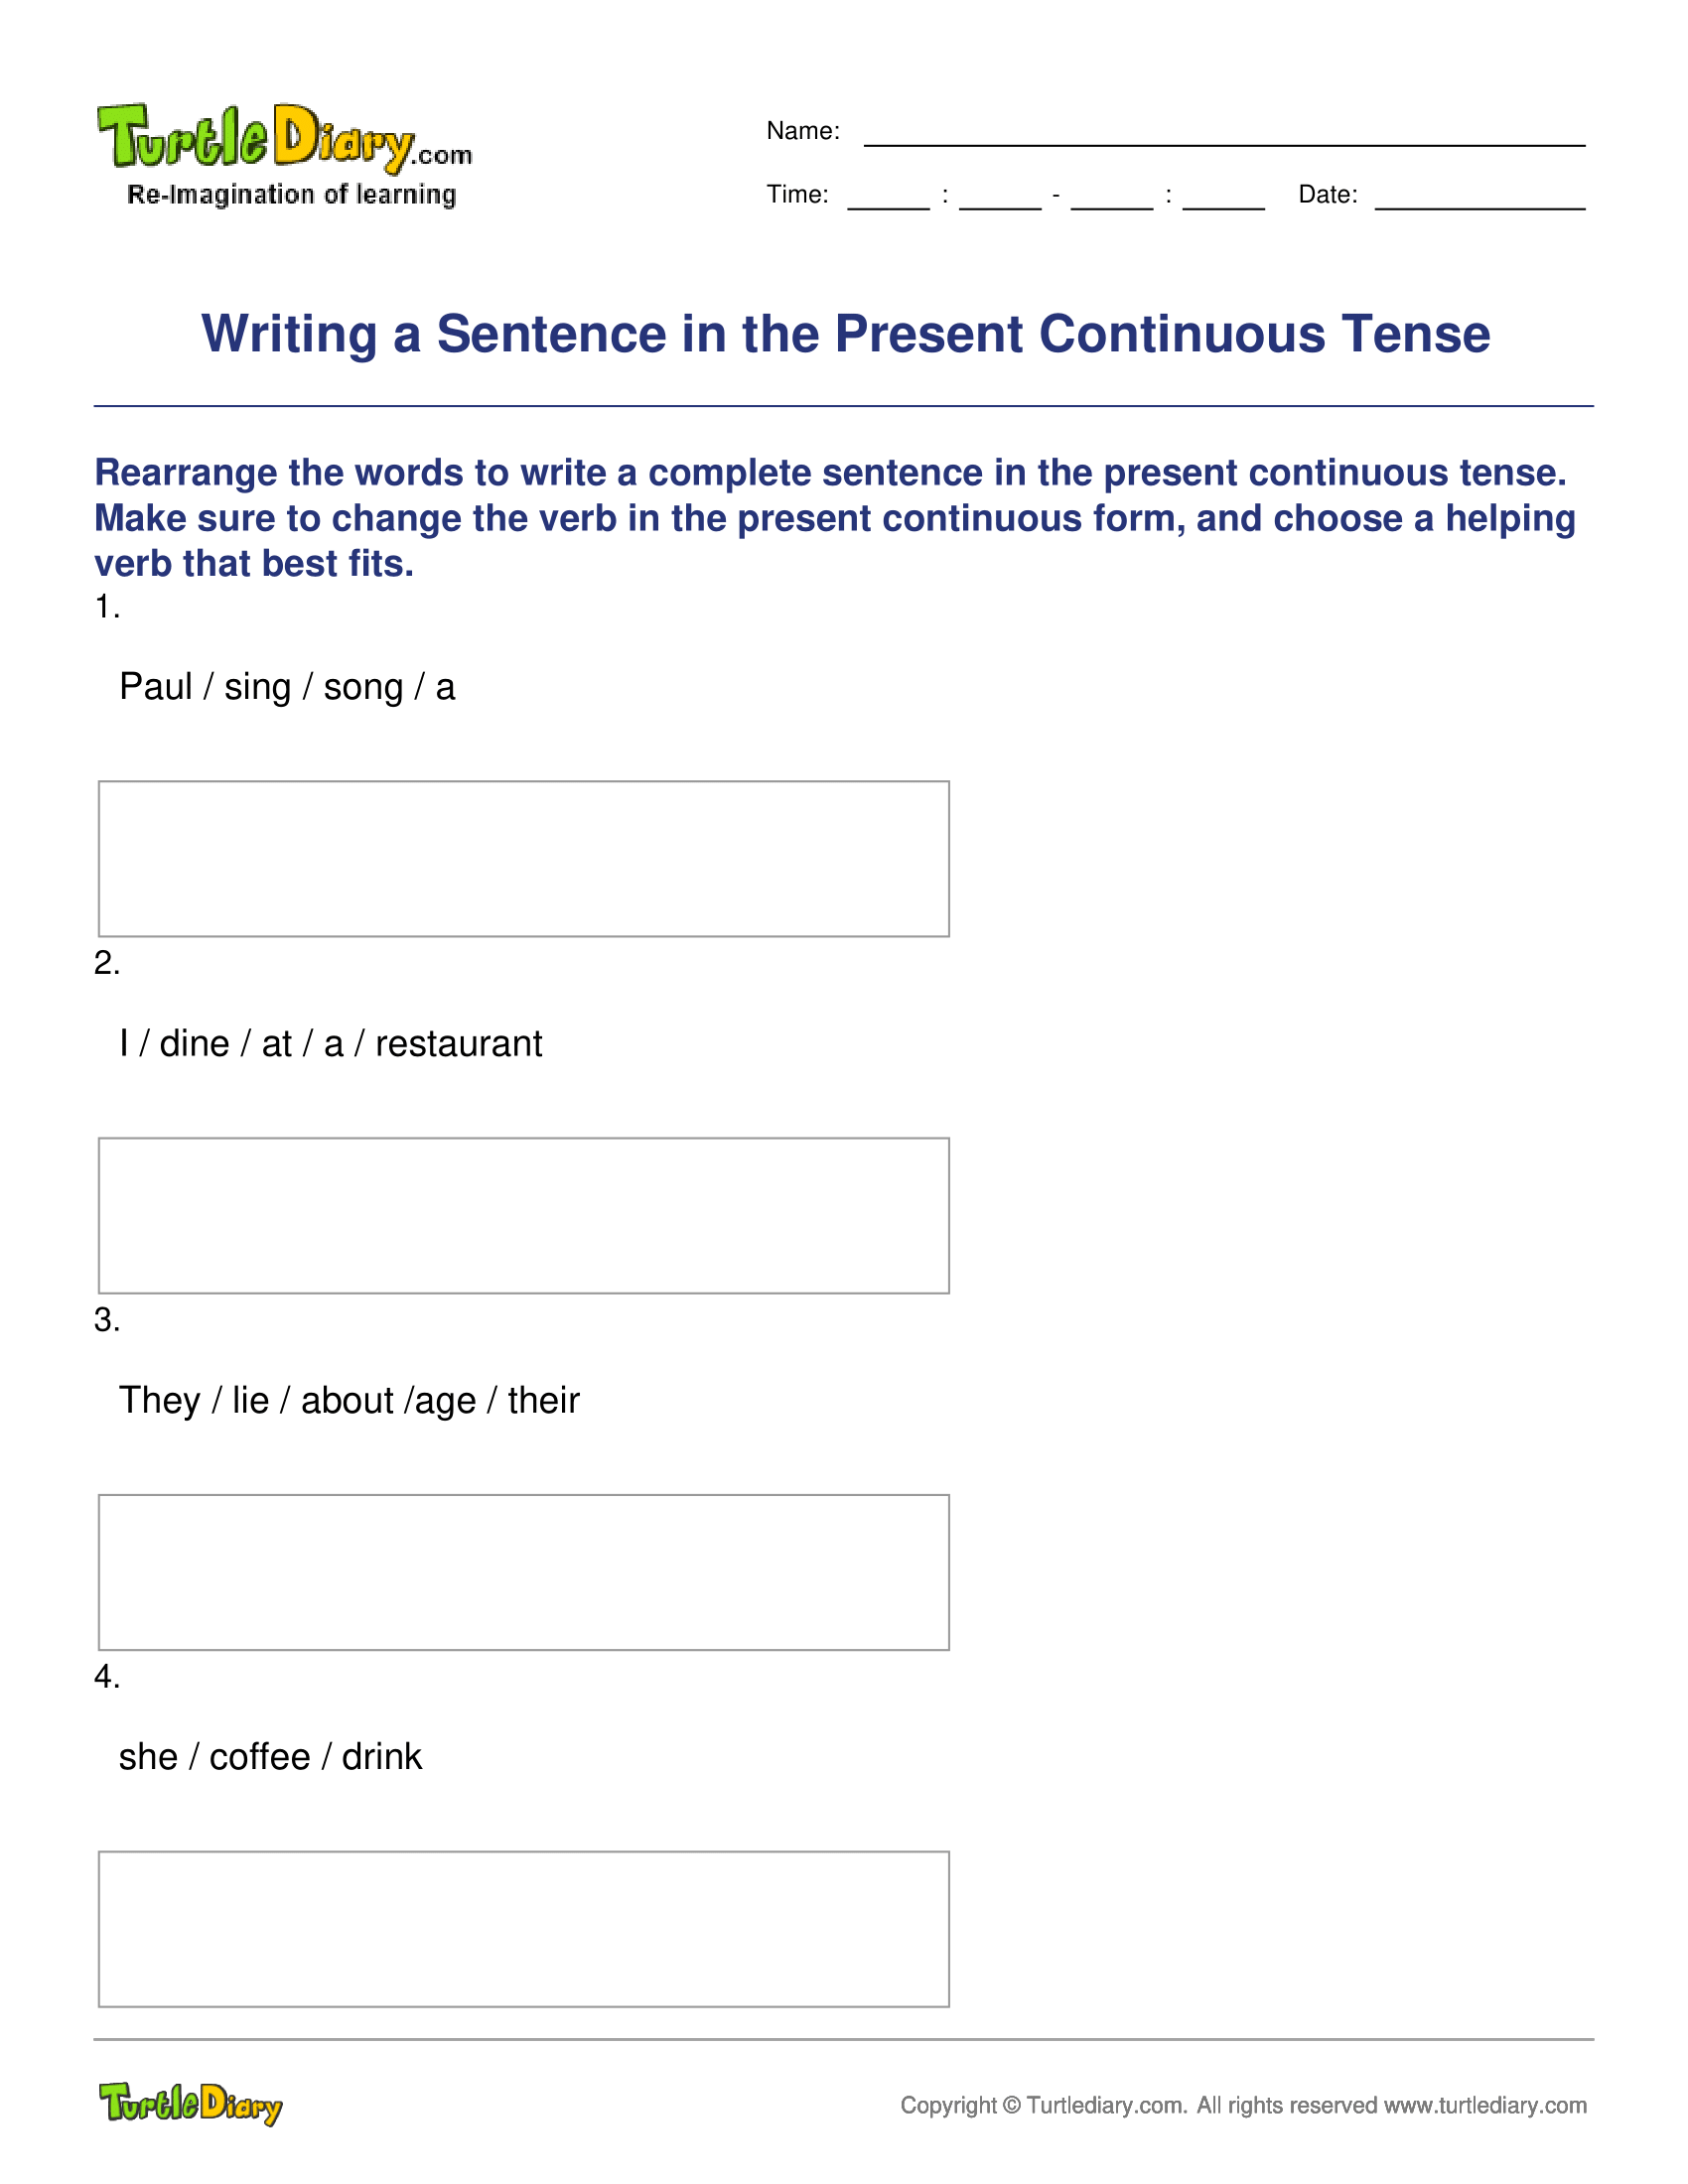 Writing a Sentence in the Present Continuous Tense